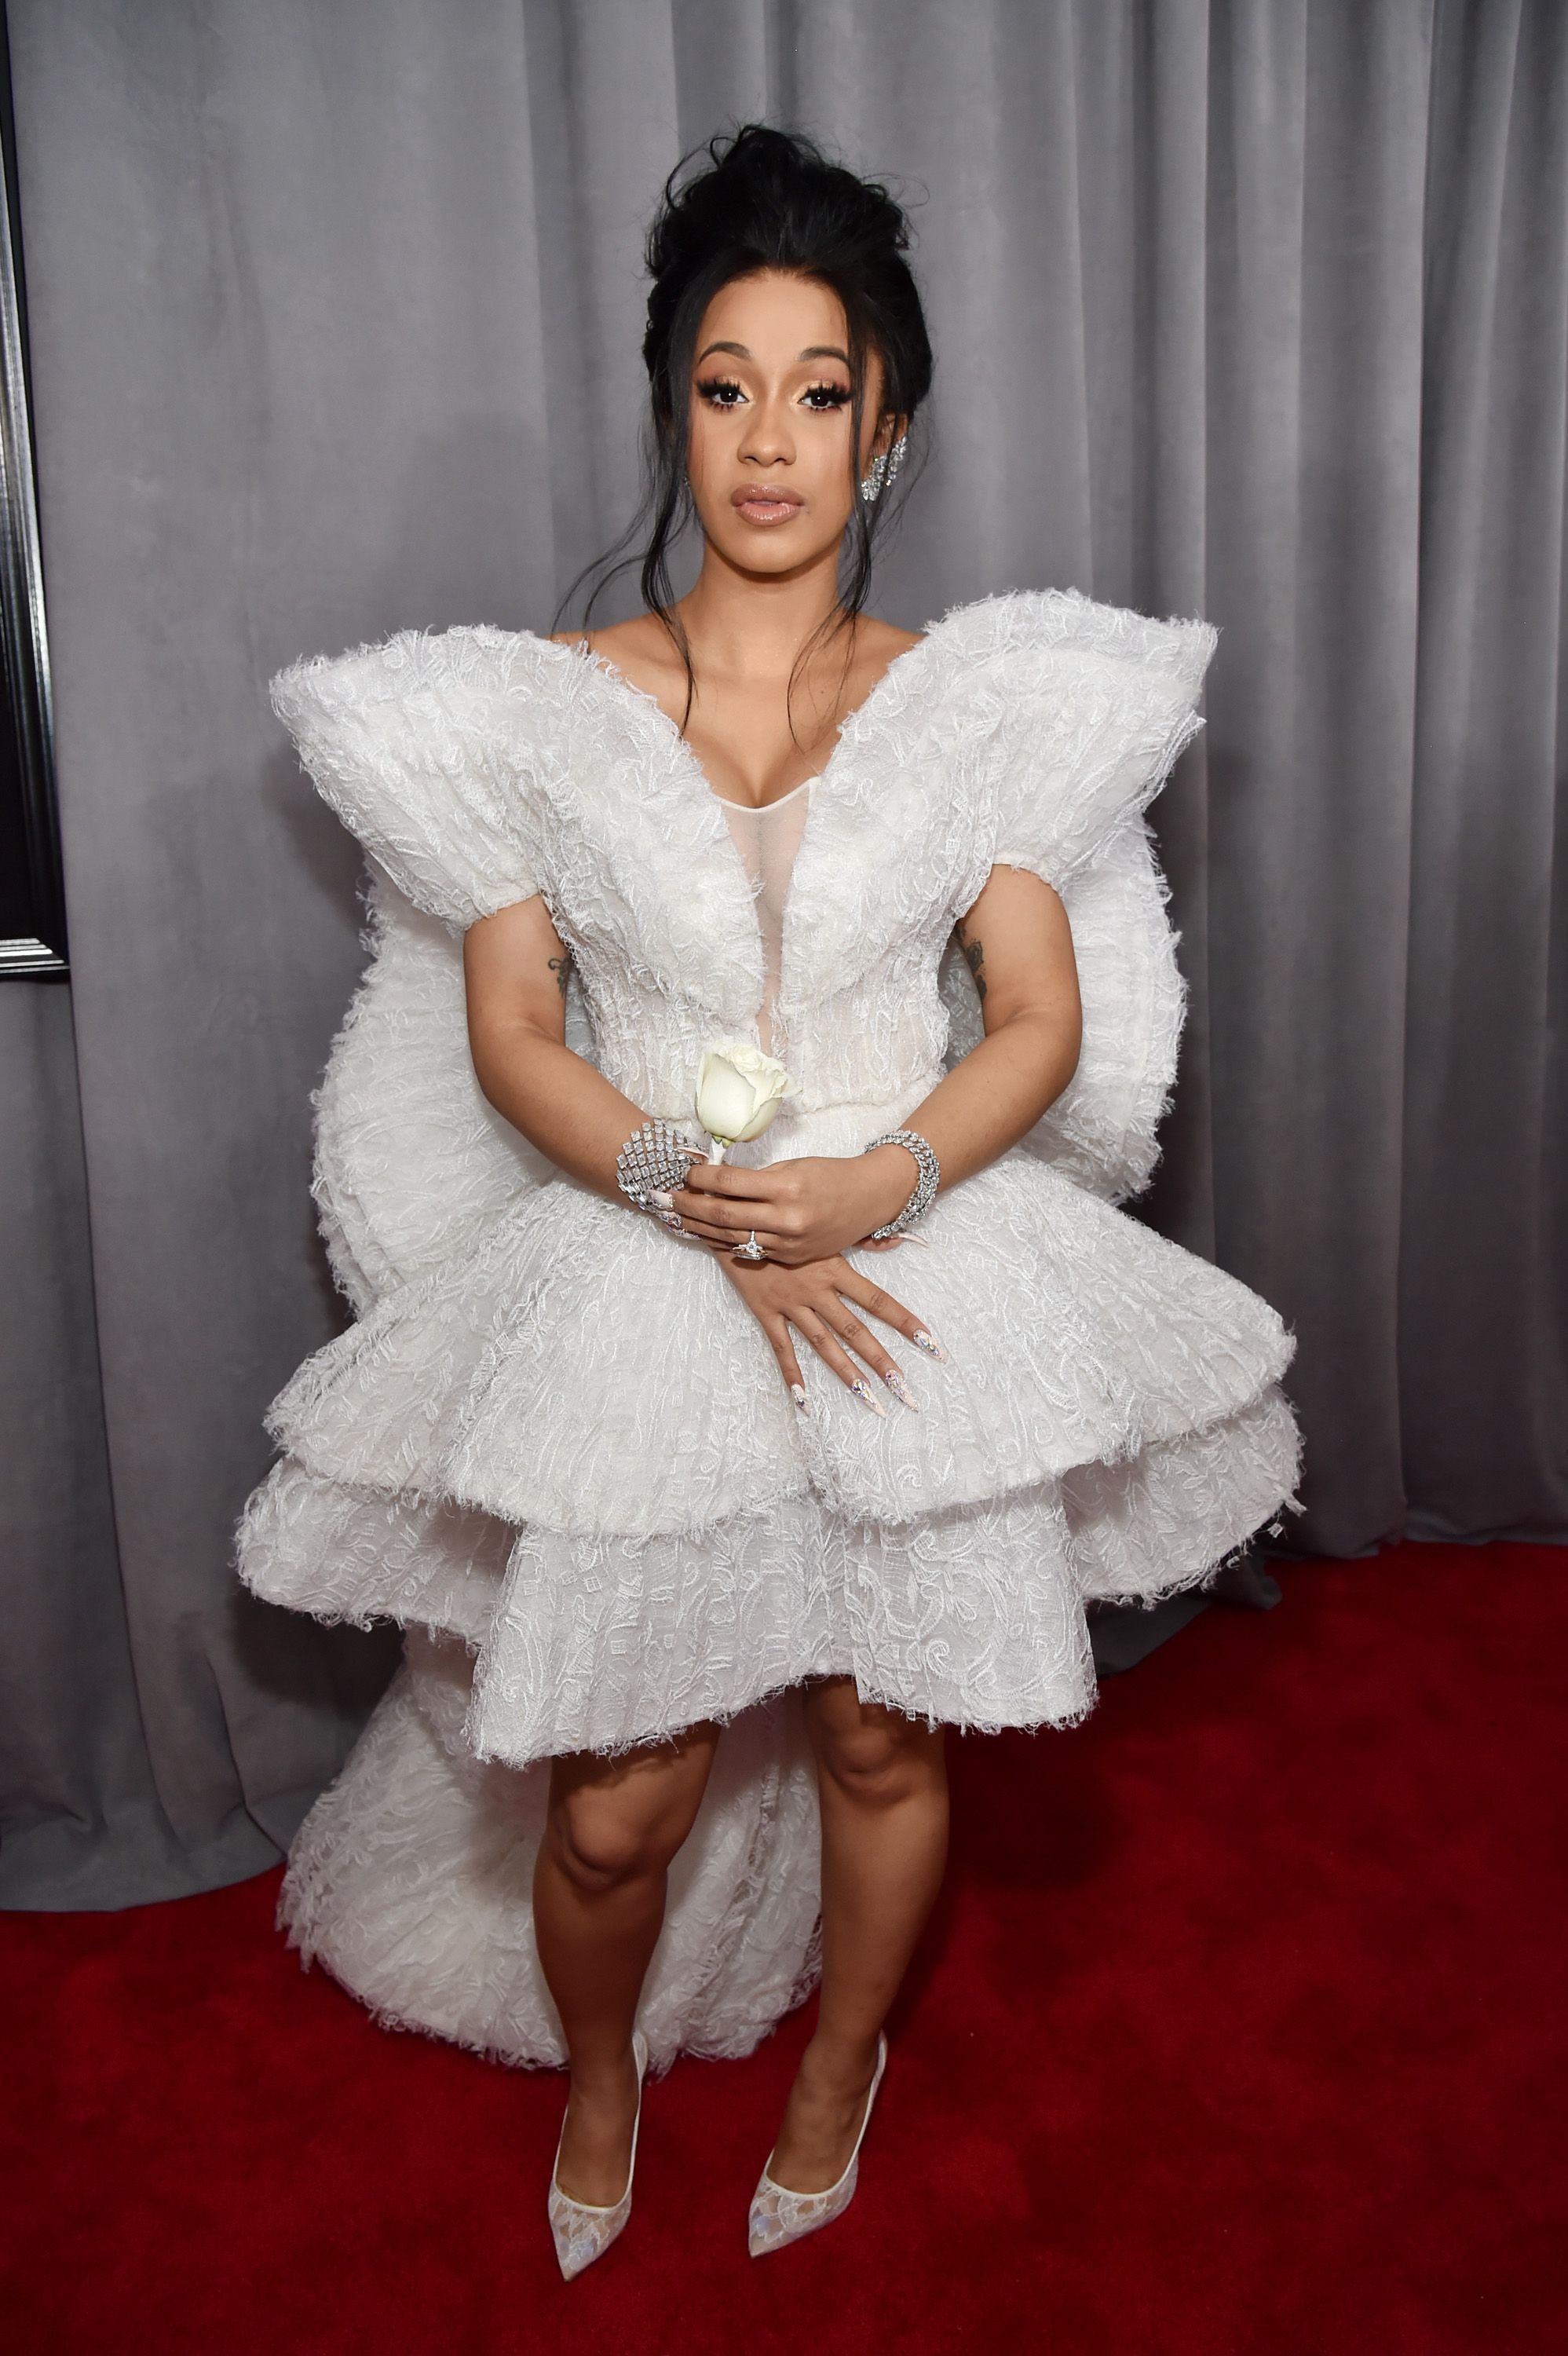 Proof Cardi B Is an Angel Sent from Above